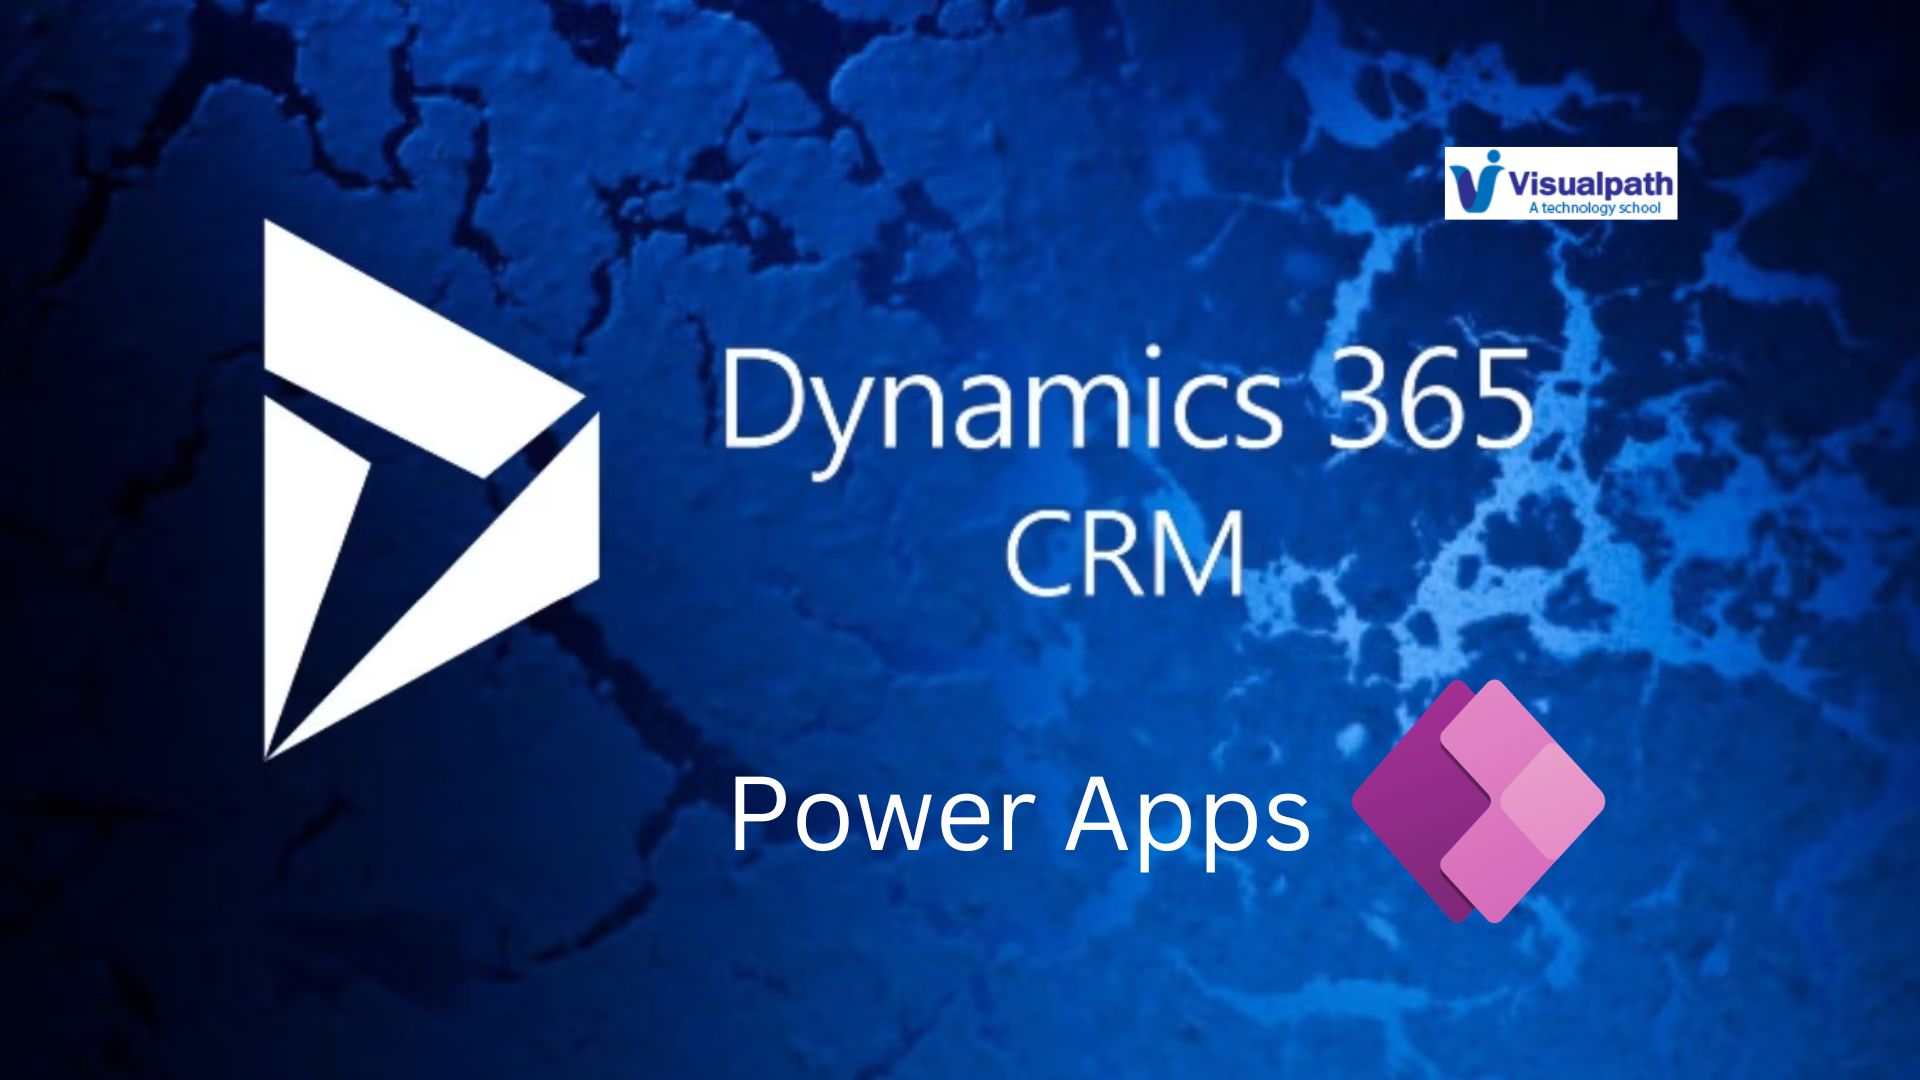 Integrating Power Apps with Dynamics 365